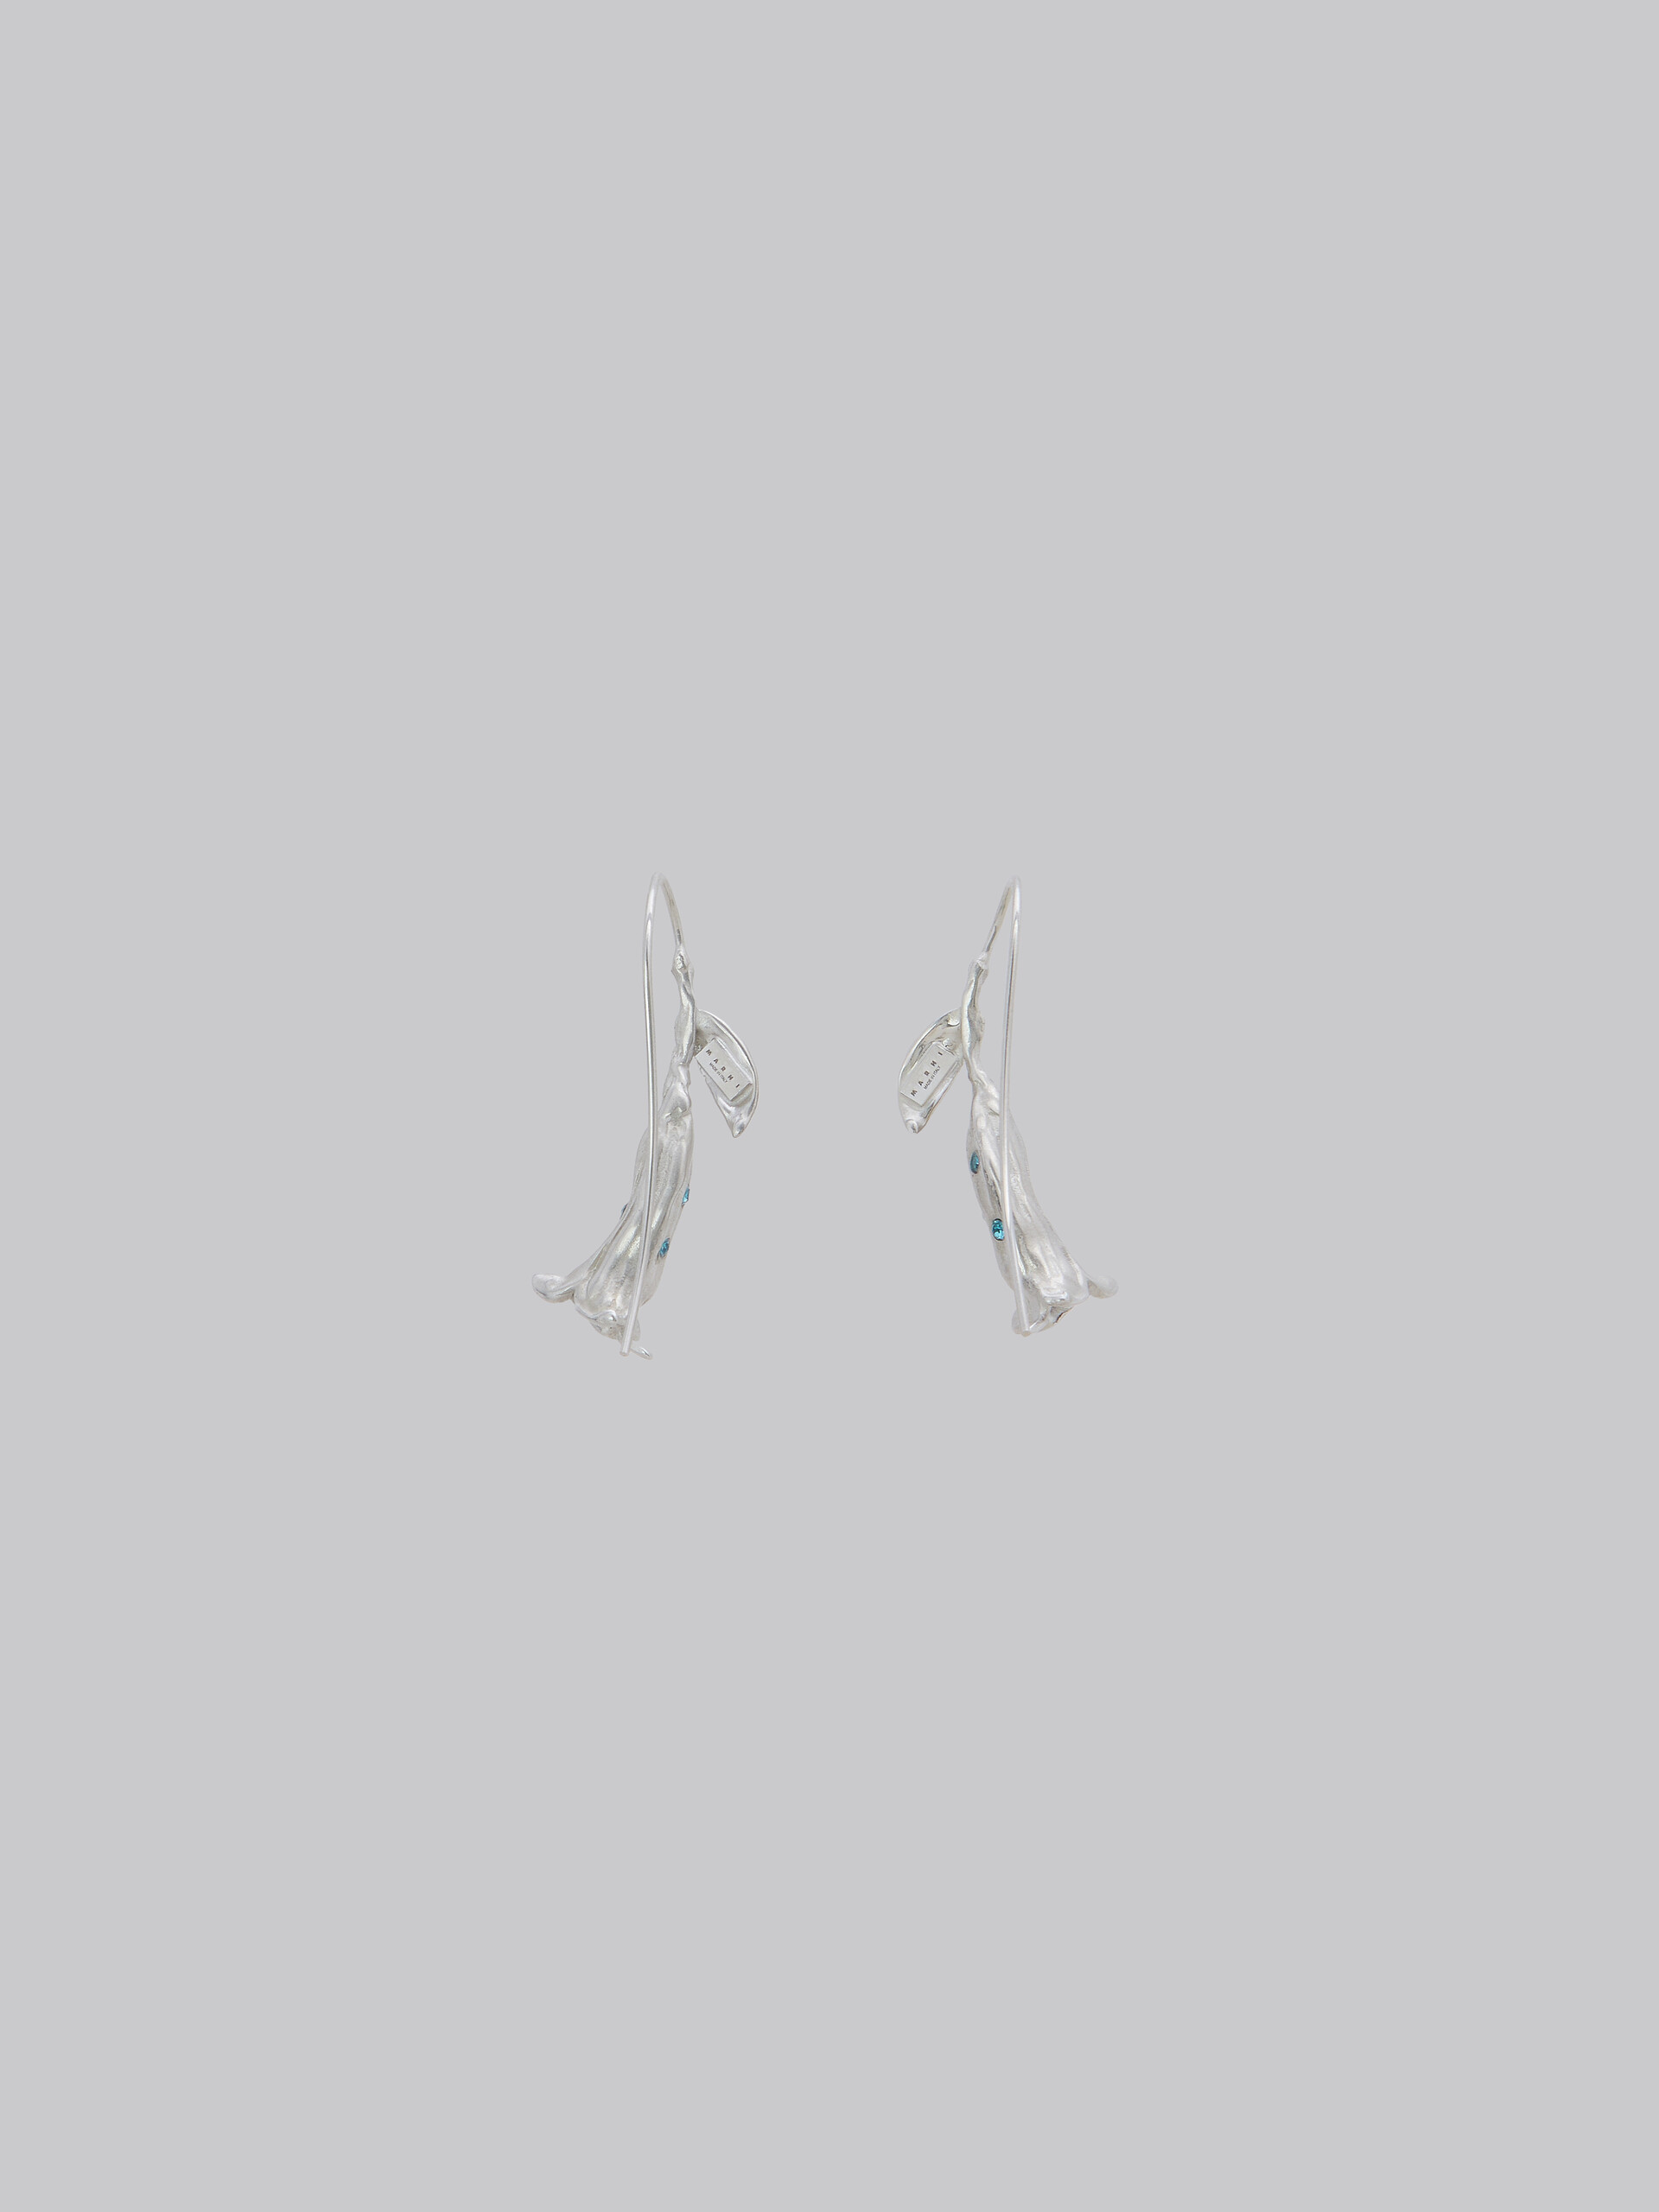 Metal calla lily earrings with crystals - Earrings - Image 3